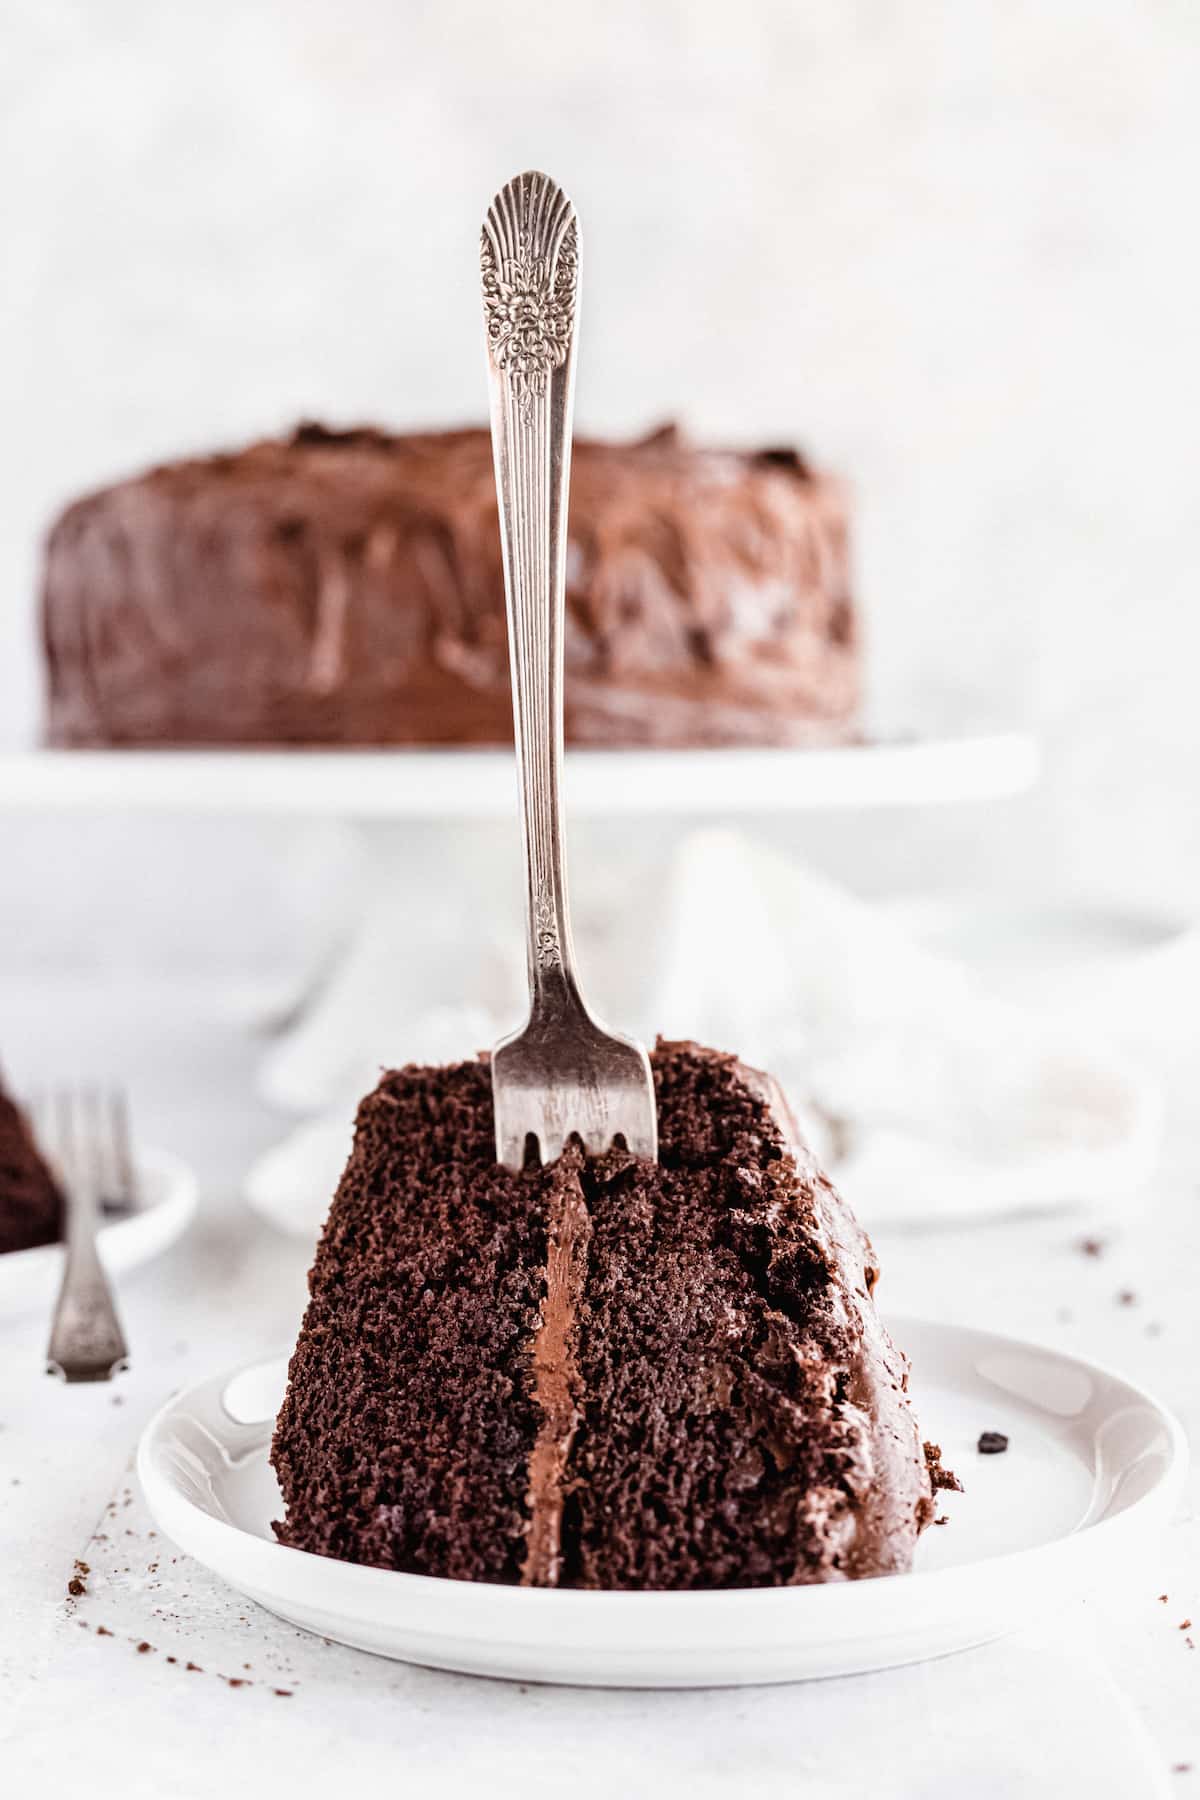 A Slice of Chocolate Cake on a White Plate with a Fork Sticking Into it